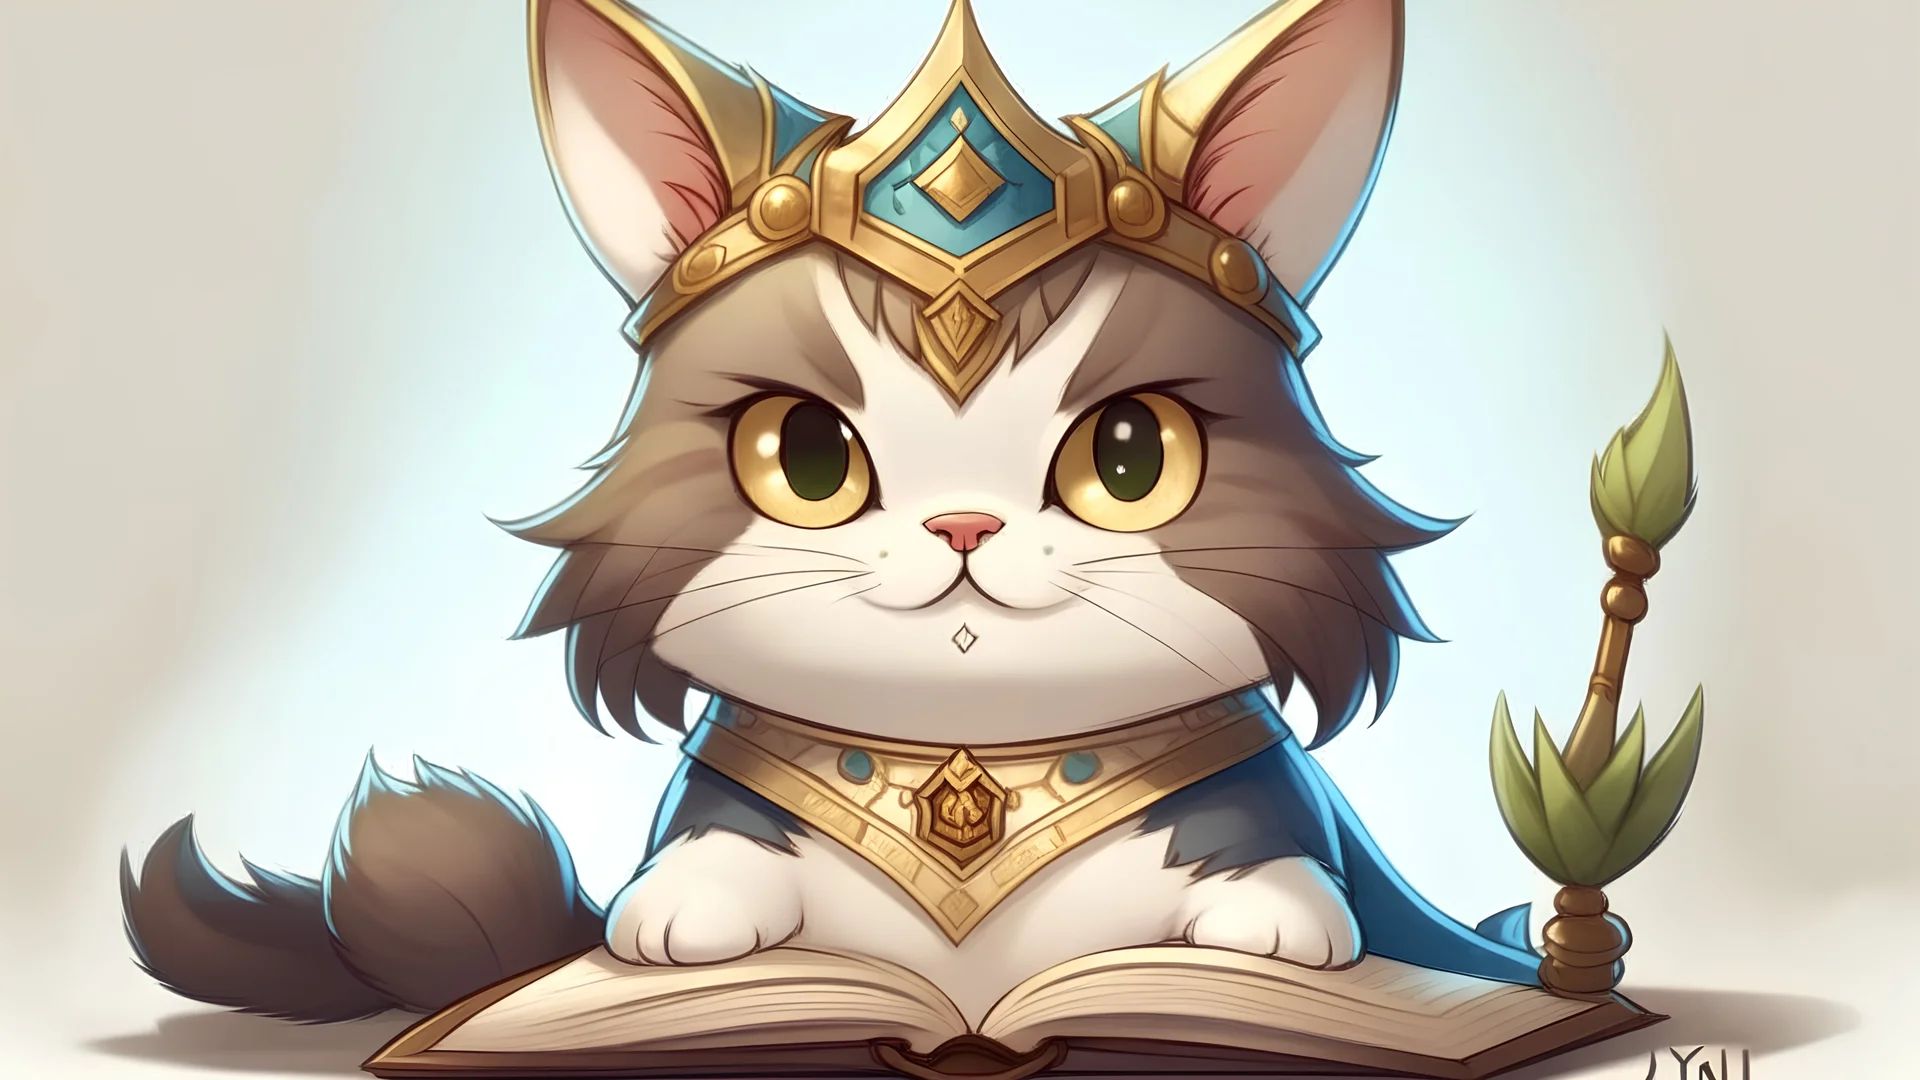 Yuumi's Cat from League of legends with a crown on the head with her Book